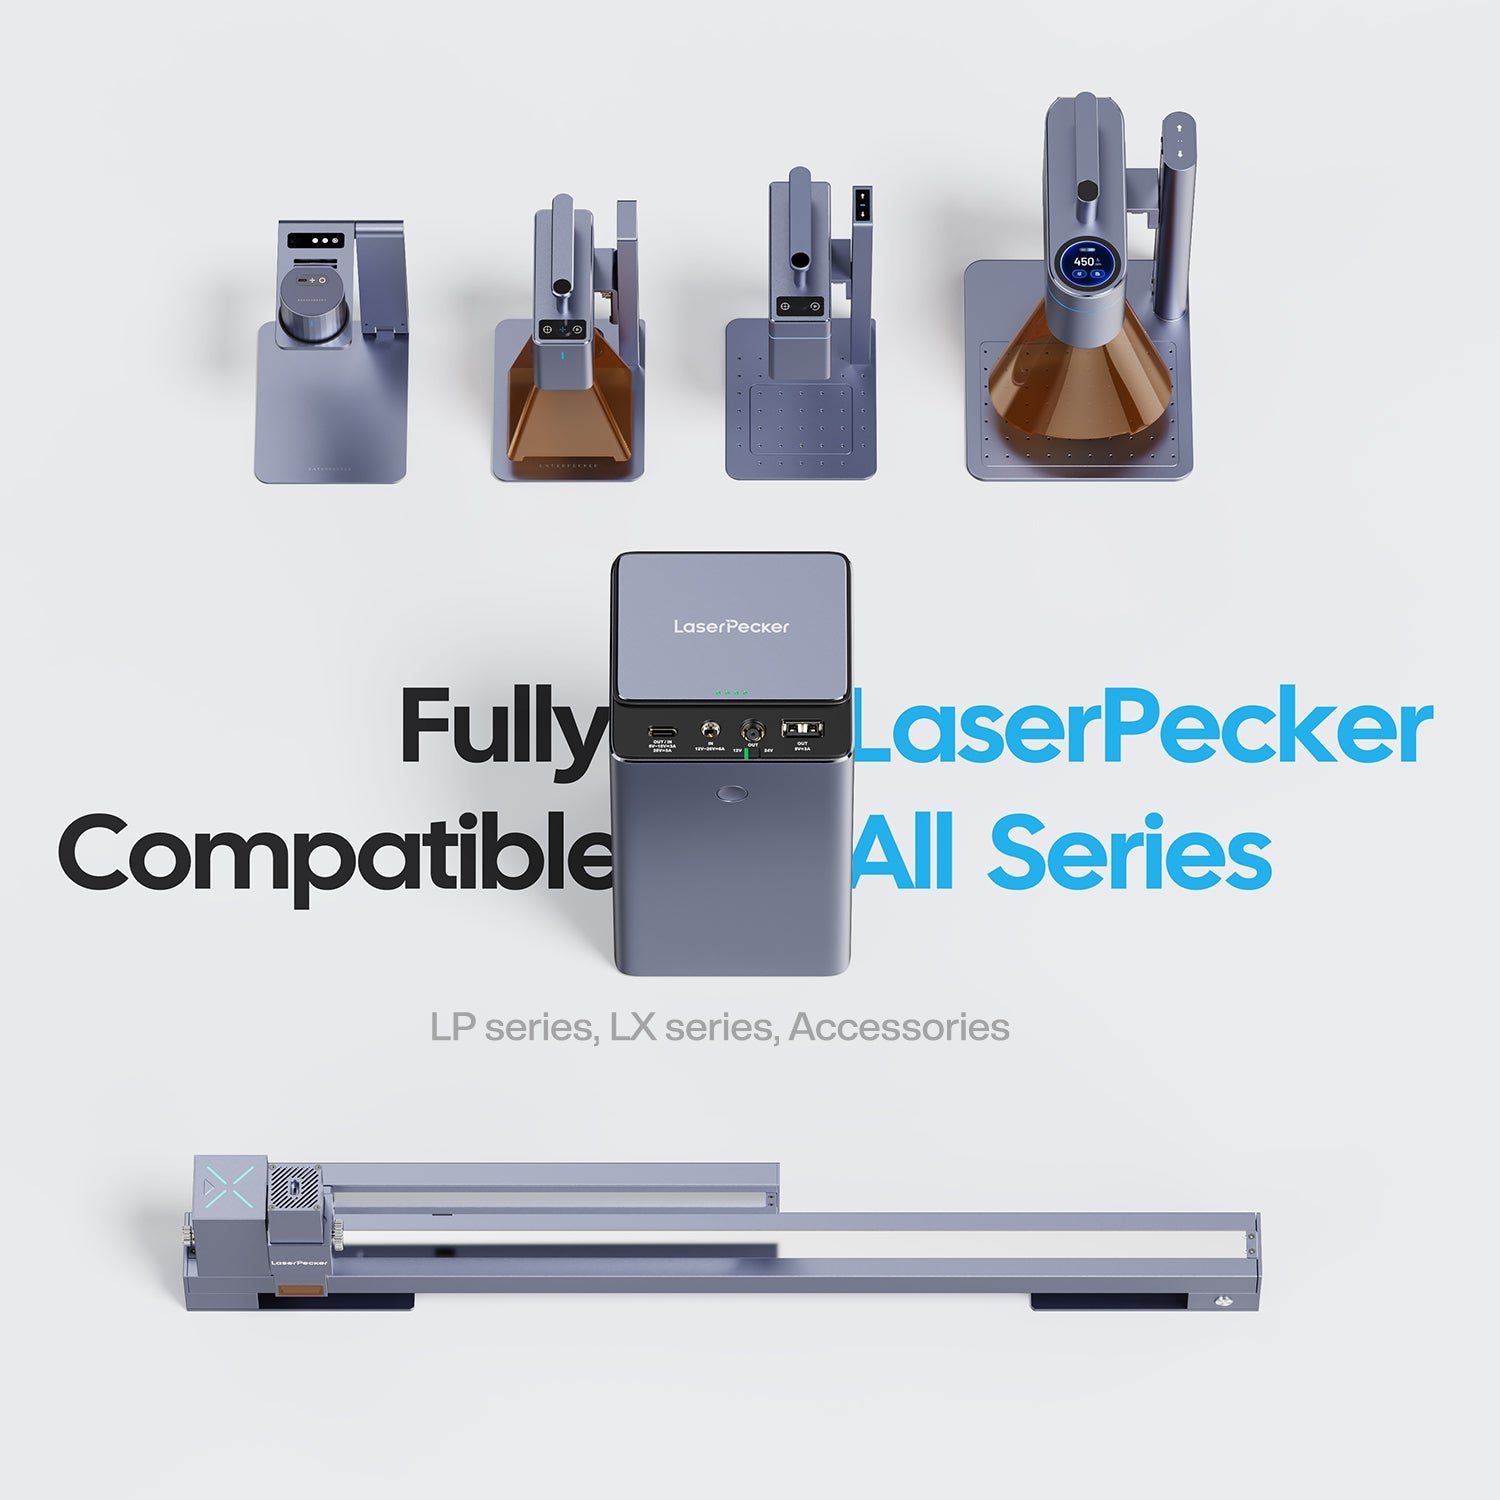 The PowerPack Plus is compatible with all LaserPecker machines